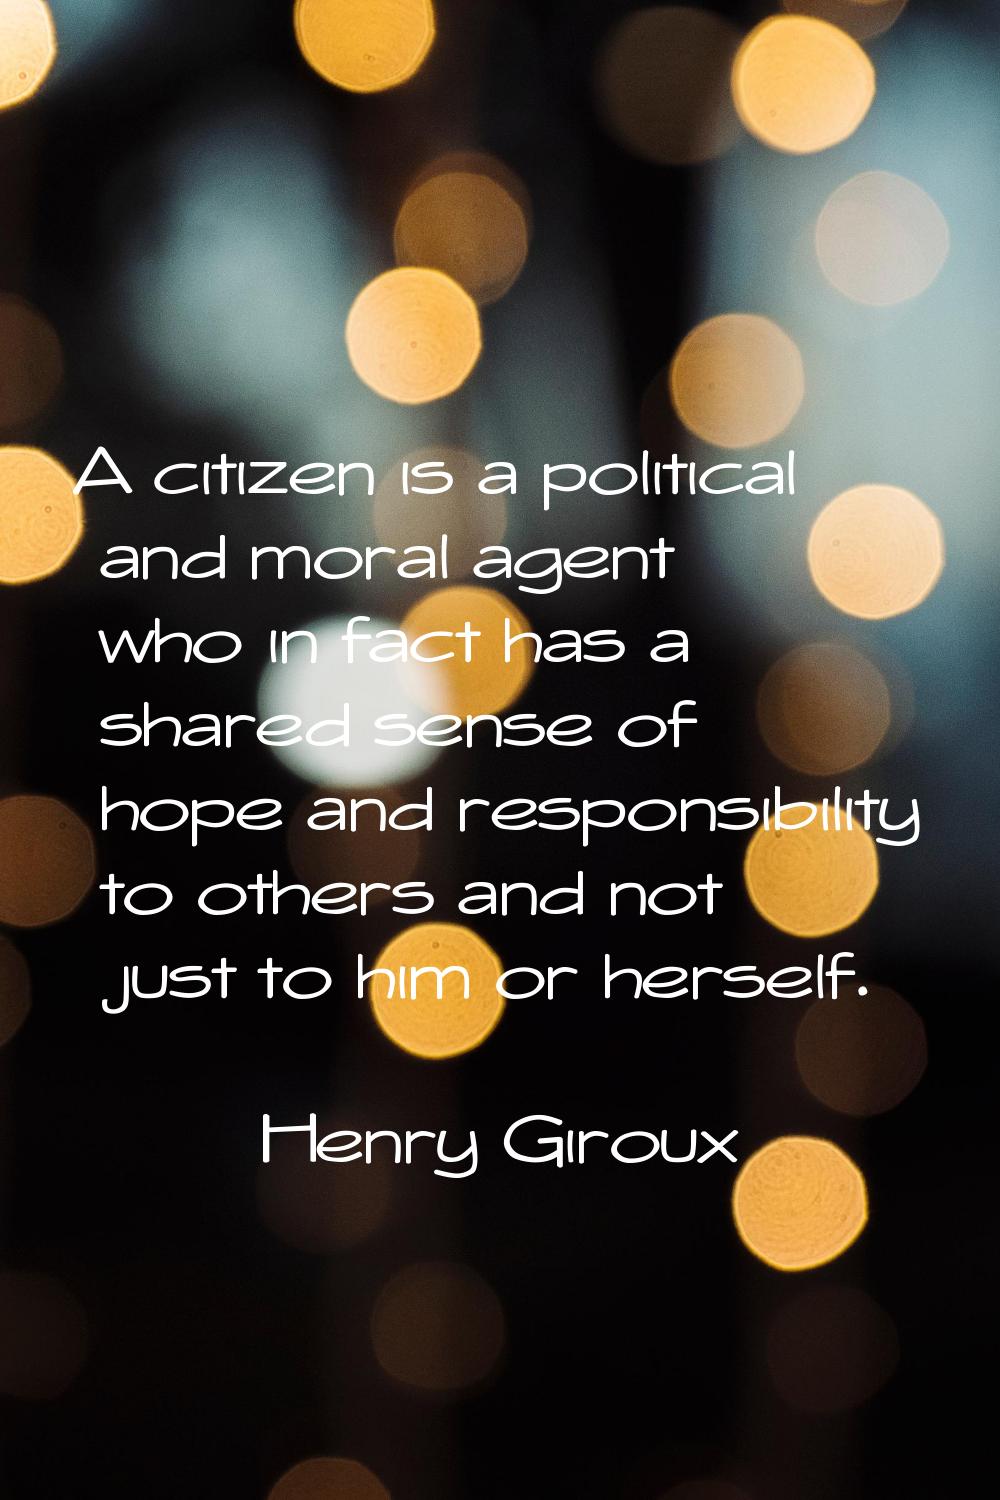 A citizen is a political and moral agent who in fact has a shared sense of hope and responsibility 